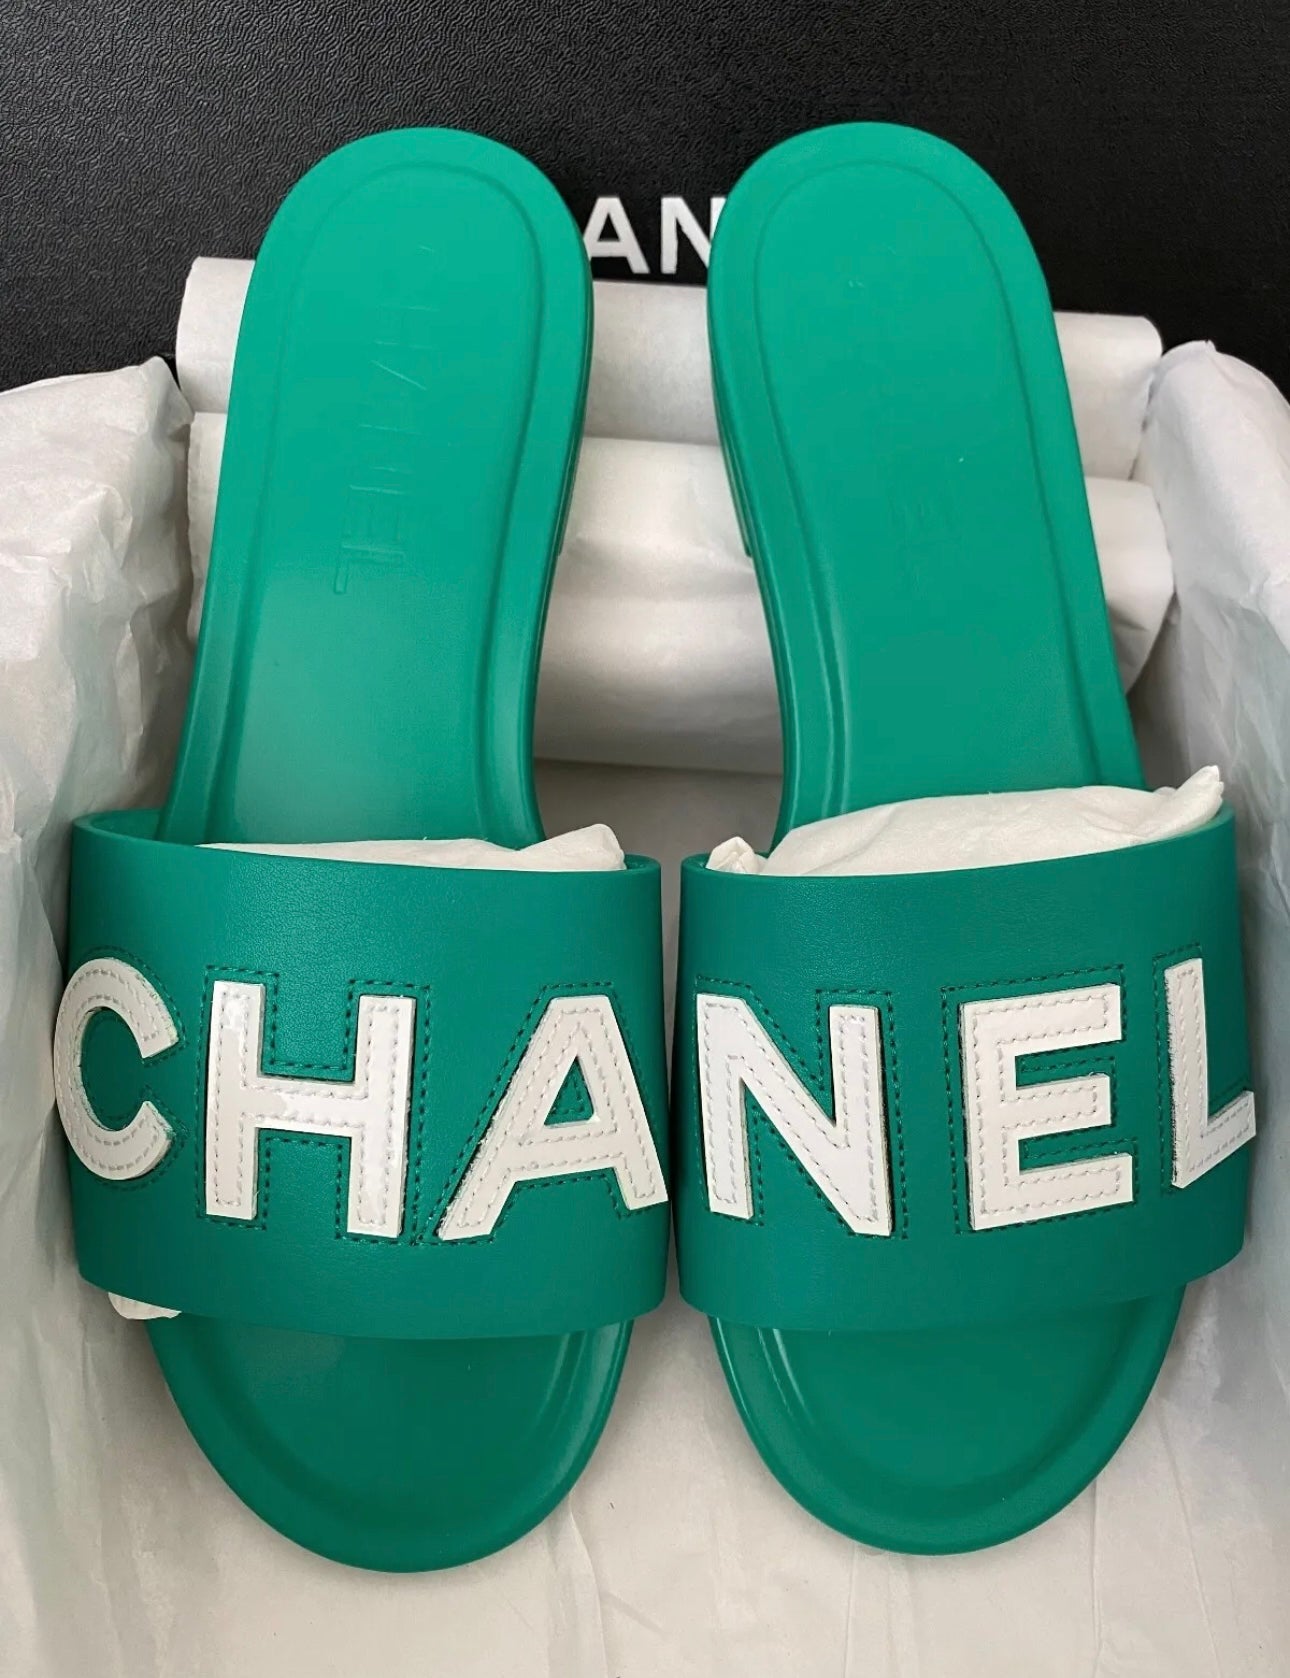 CHANEL CHA NEL LOGO GREEN LEATHER FLAT SHOES SLIDES MULES – Miami